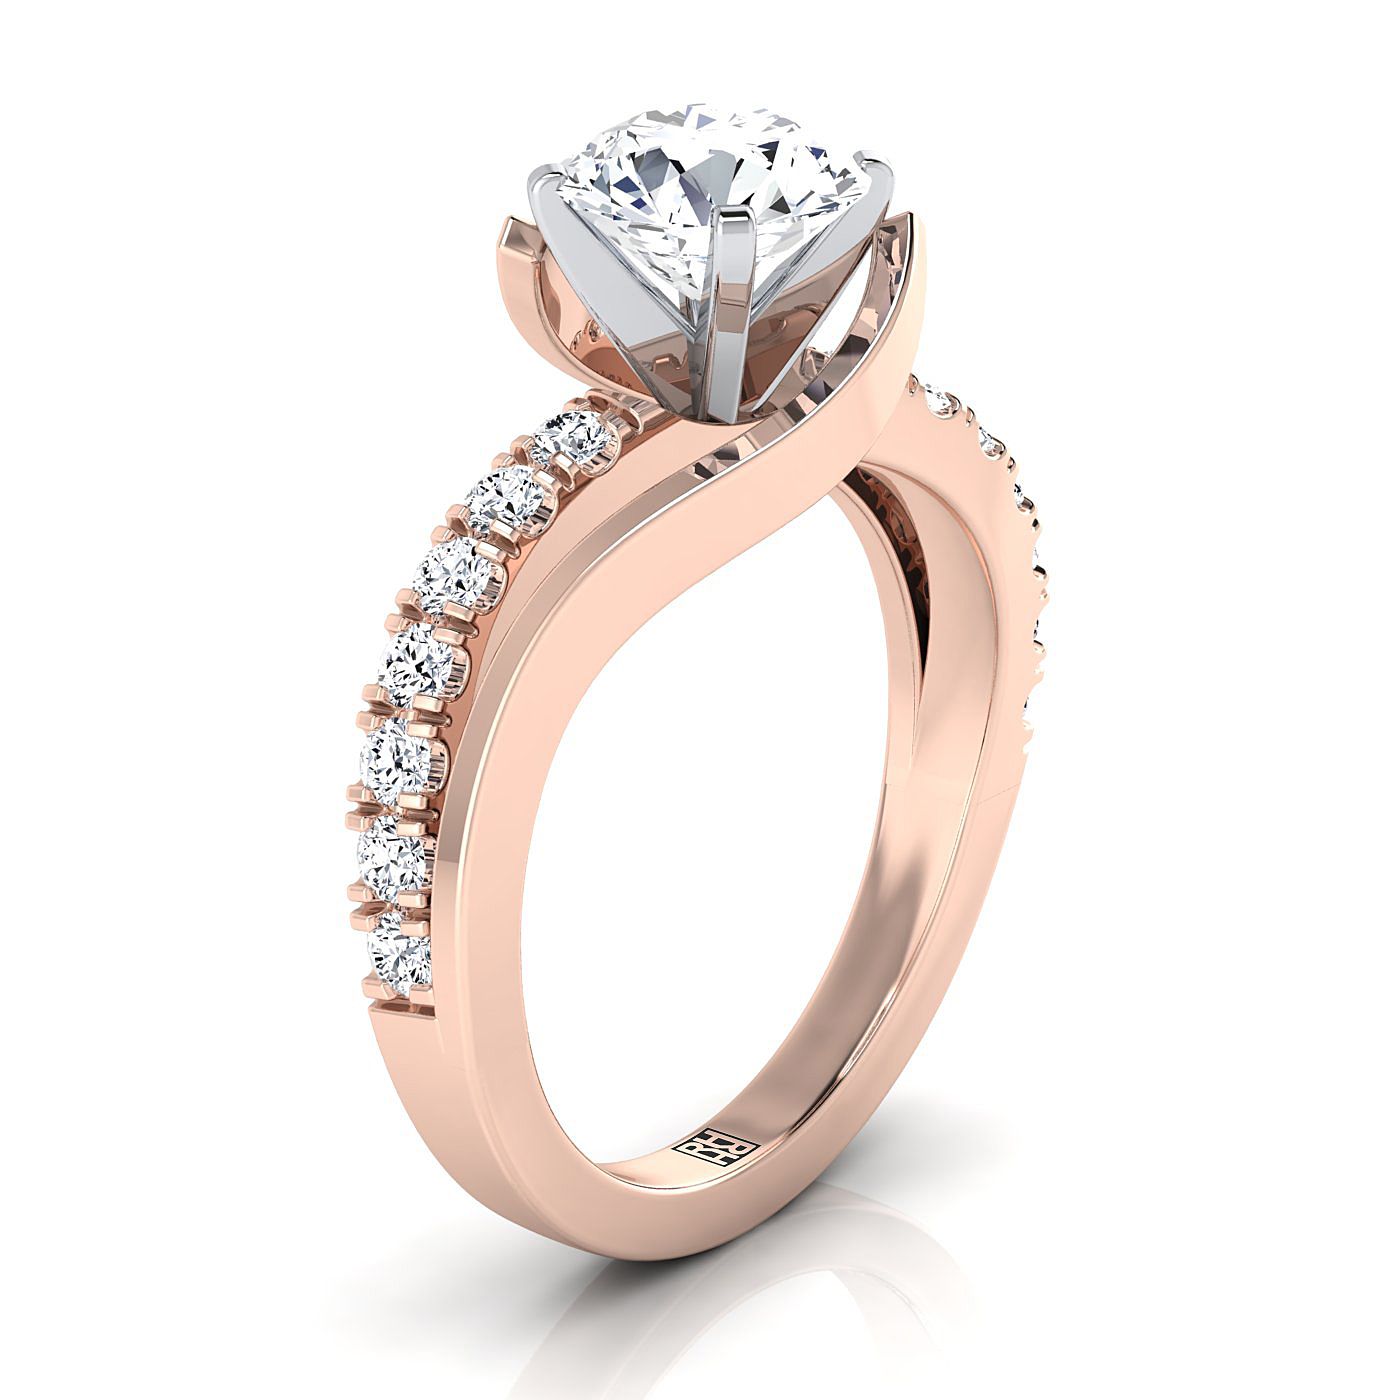 14K Rose Gold Round Brilliant Unique Bypass Diamond Pave Swirl Engagement Ring -3/8ctw